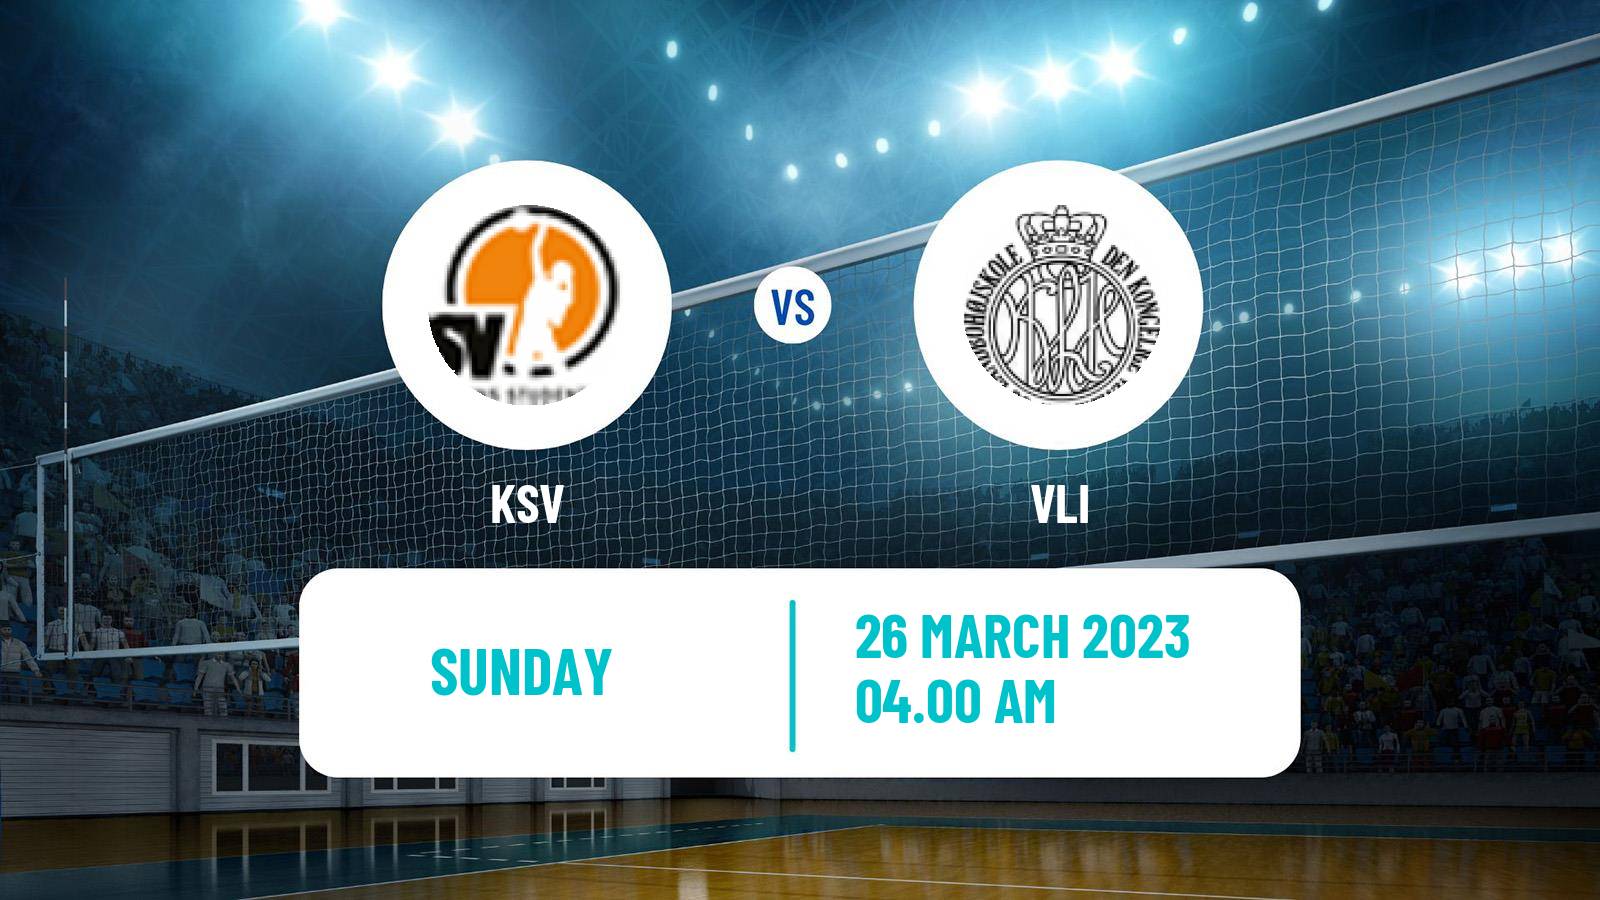 Volleyball Danish 1 Division East Volleyball Women KSV - VLI